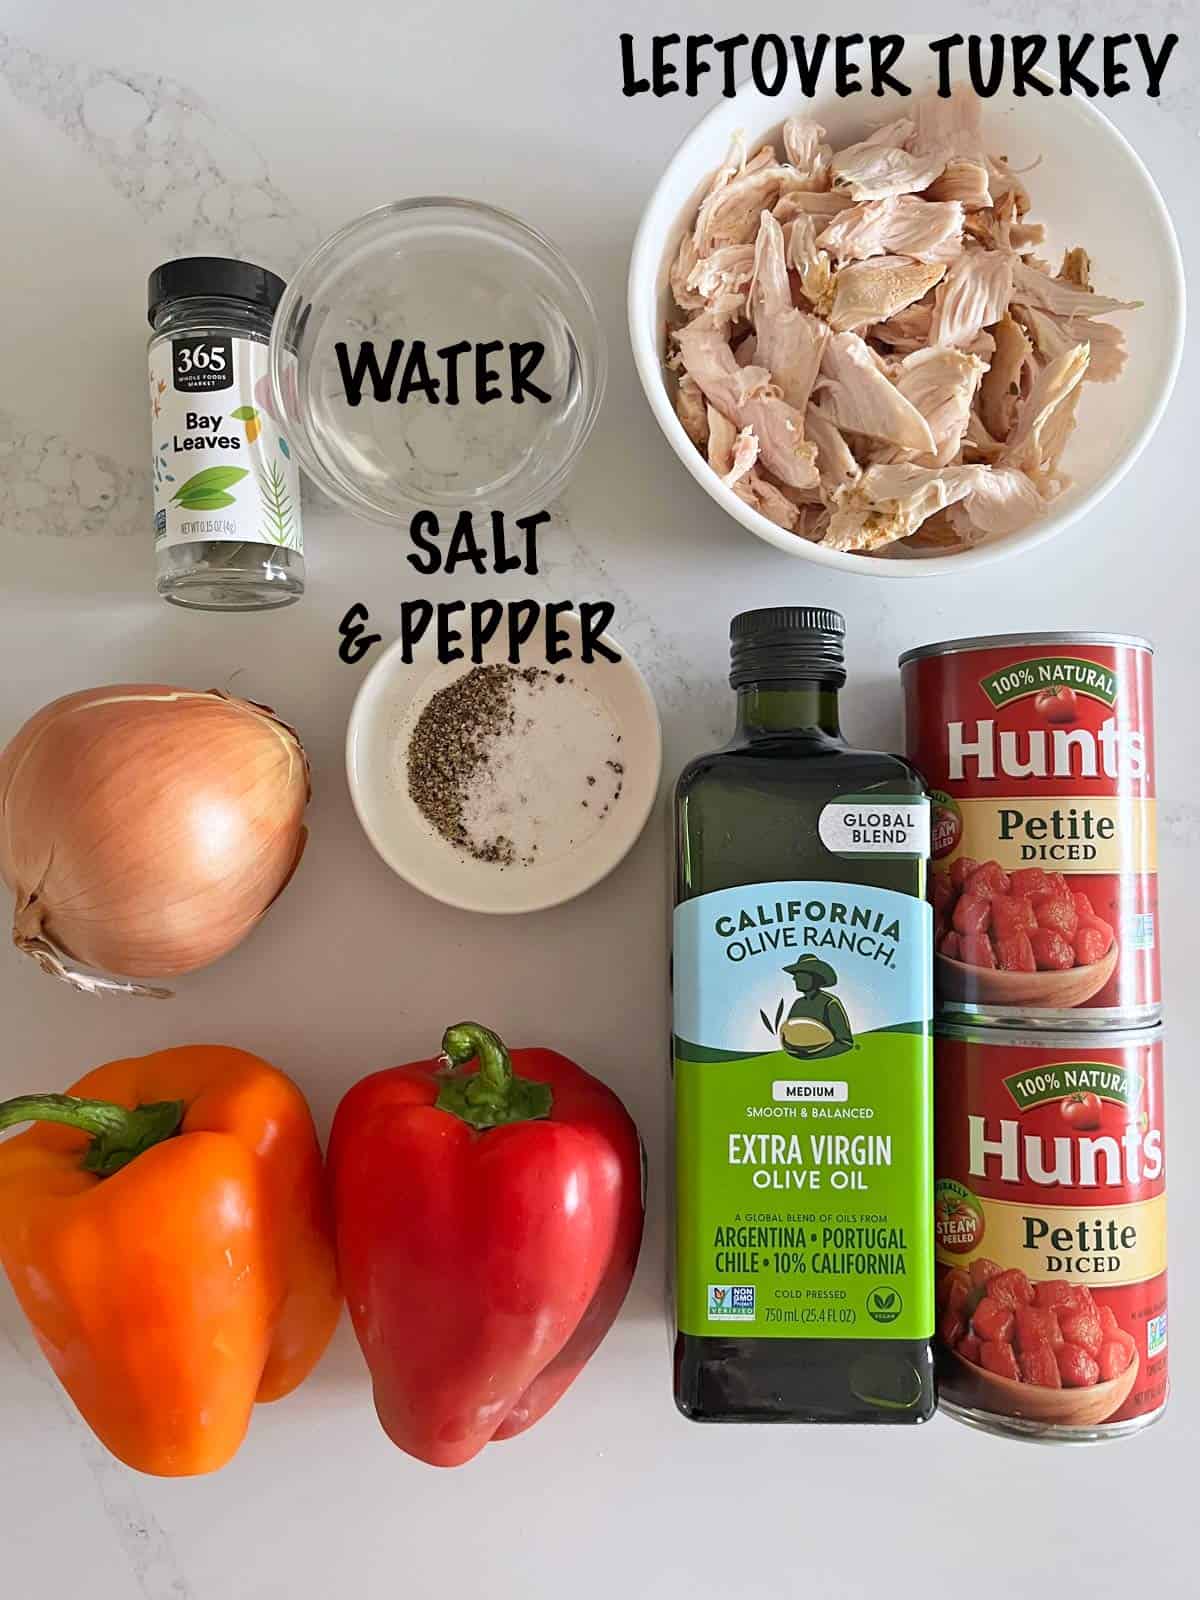 The ingredients needed to make a leftover turkey chili.